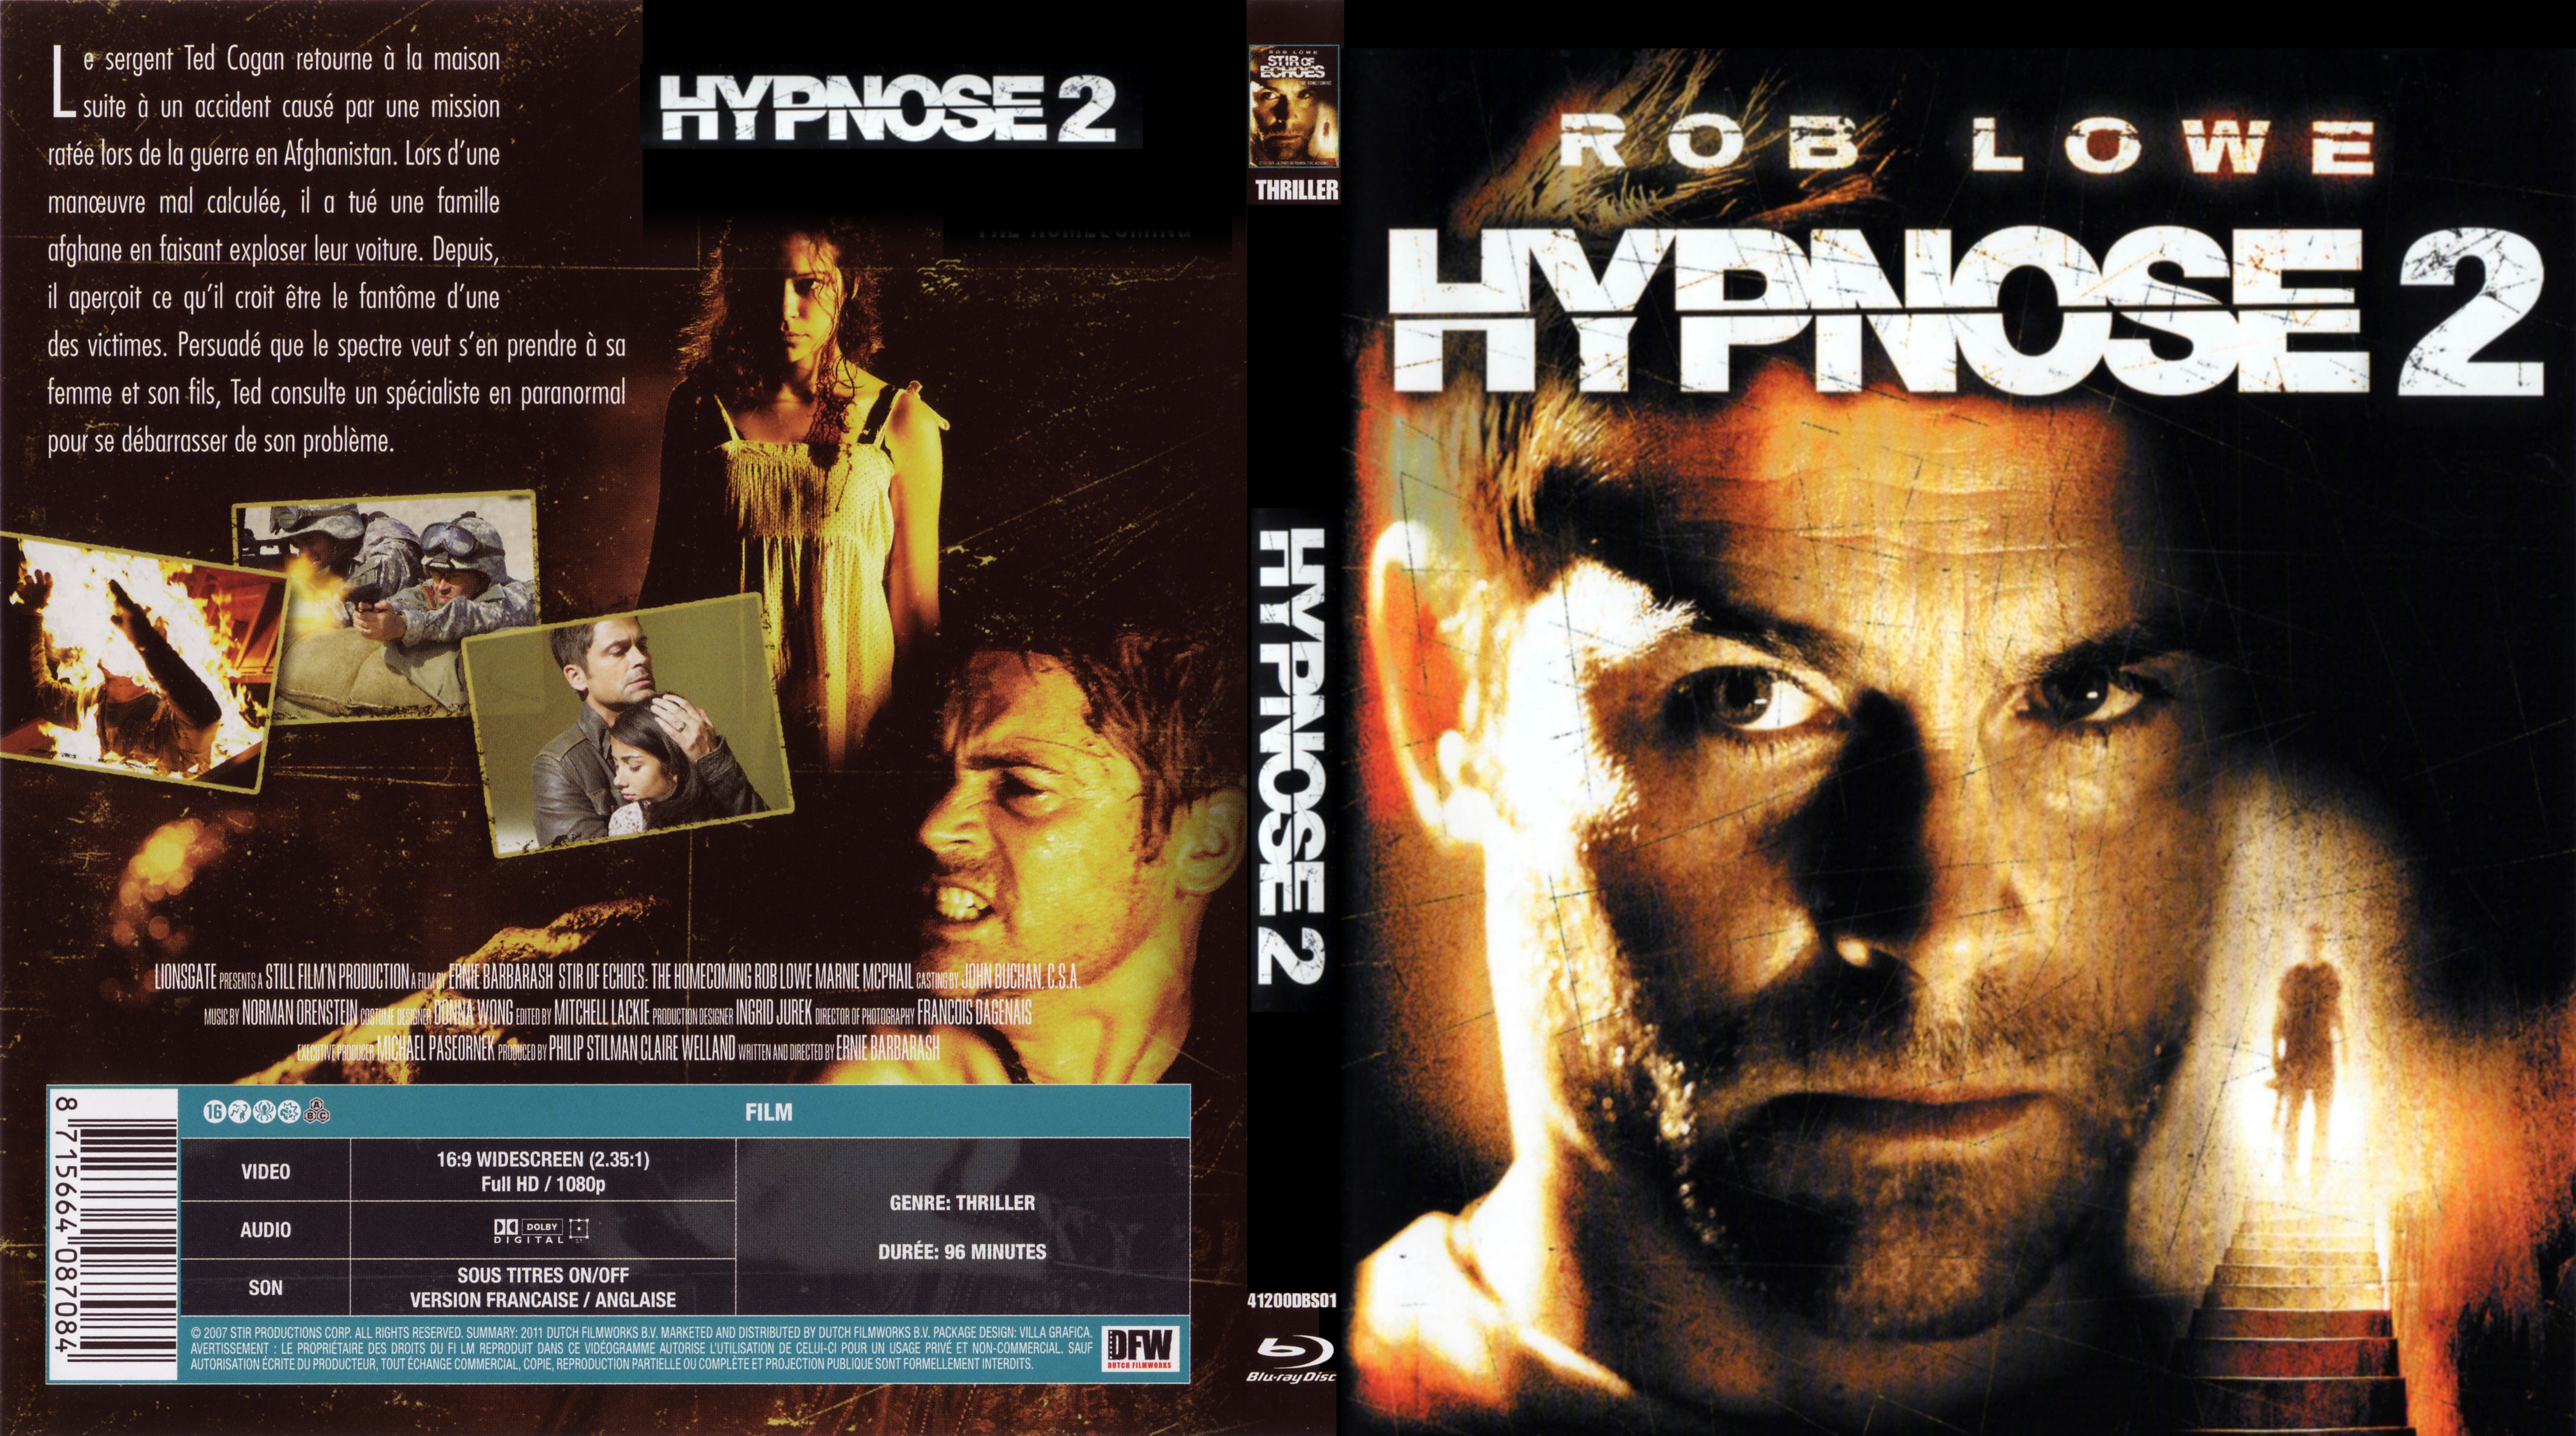 Jaquette DVD Hypnose 2 (BLU-RAY)